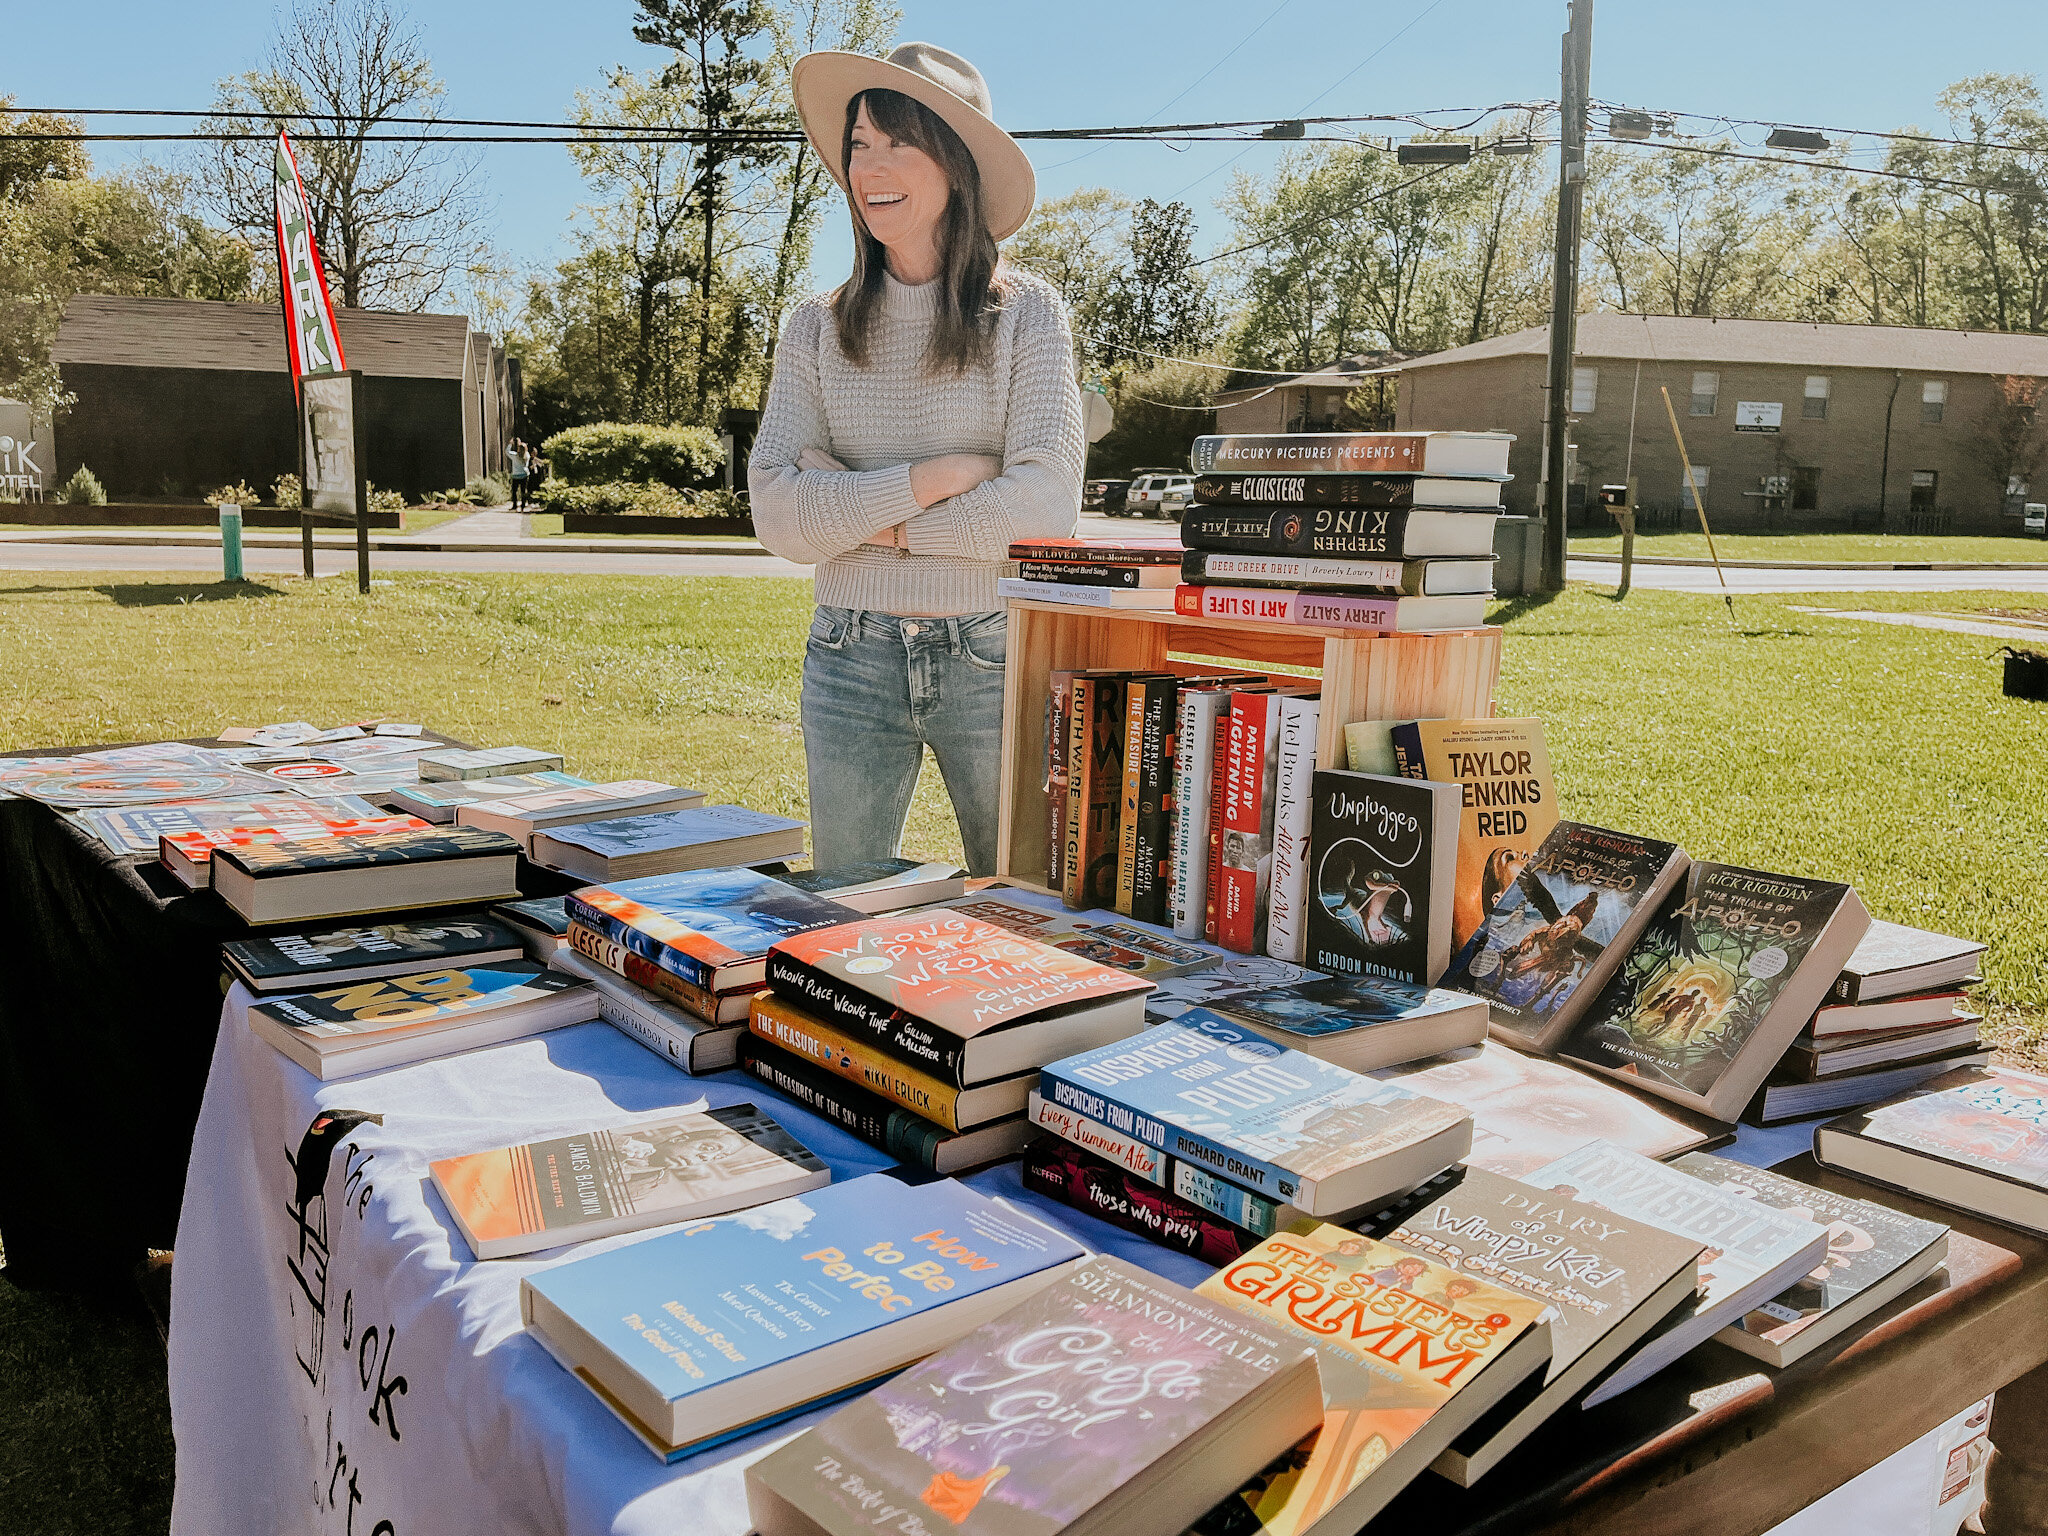 Meet @bookporteros!

If you haven't already heard, The Book Porter will be opening as part of The Collective during our 3rd phase of development! We are so thrilled to bring a book store to Ocean Springs 📚

In the meantime, follow them to keep up wi